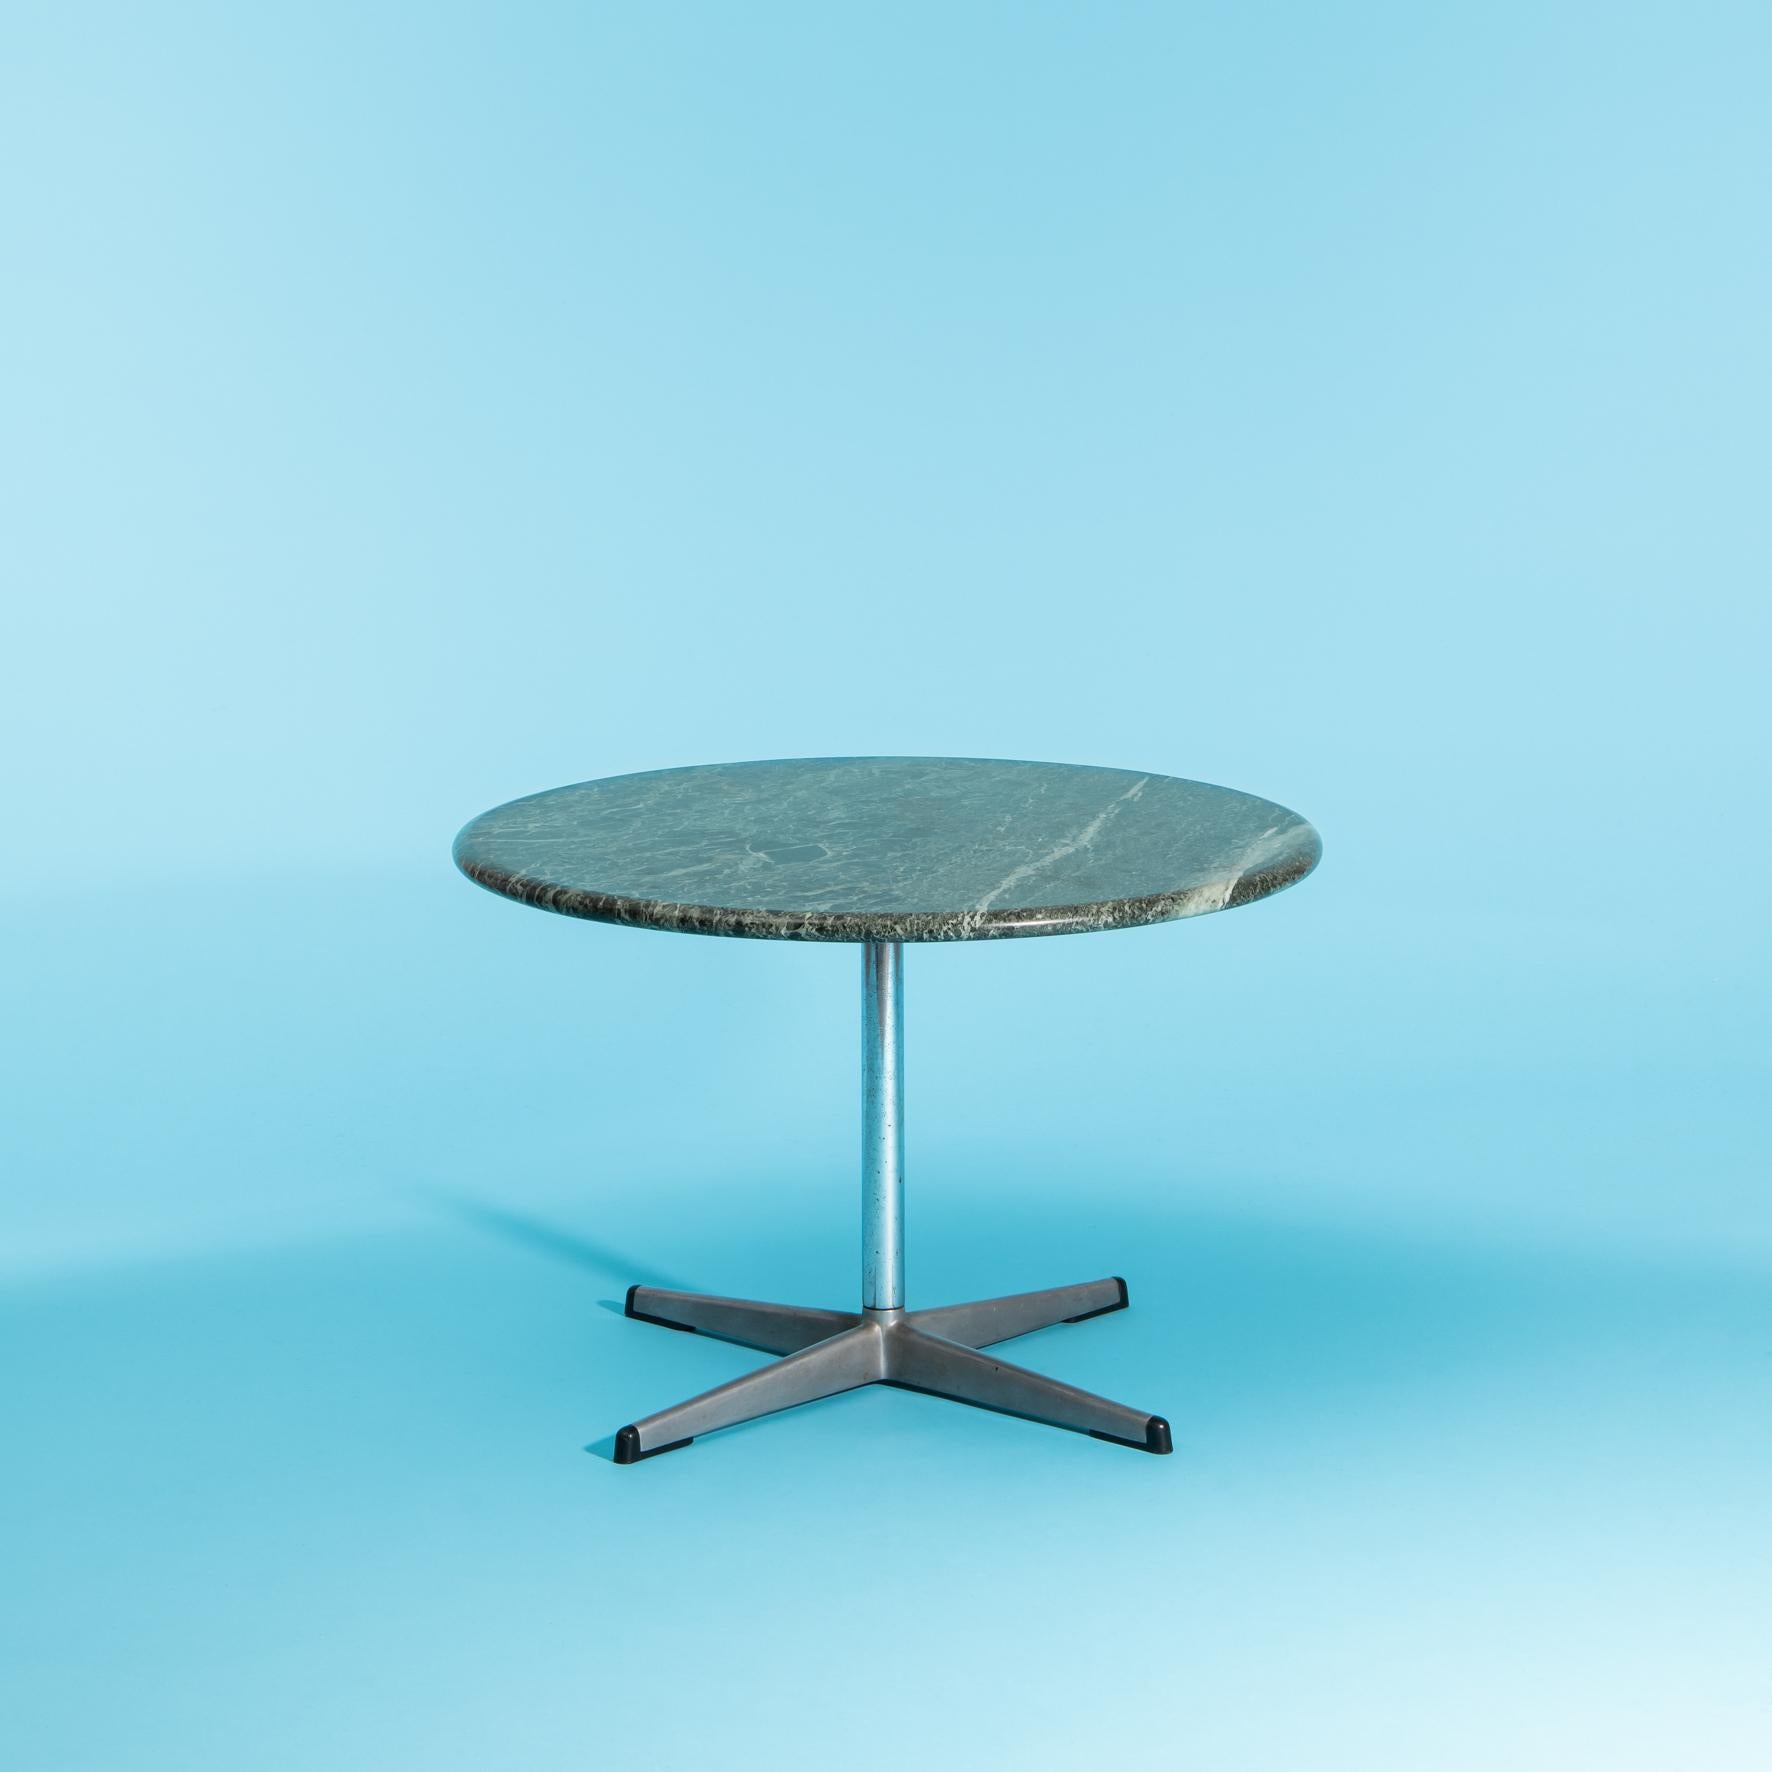 FERMIGIER Étienne (1932-1973)
Delta collection coffee table, Airborne edition, France, circa 1960
Chrome-plated metal, black rubber, green marble
Diam. 65 x Height 42 cm

Literature: Airborne catalog, circa 1960